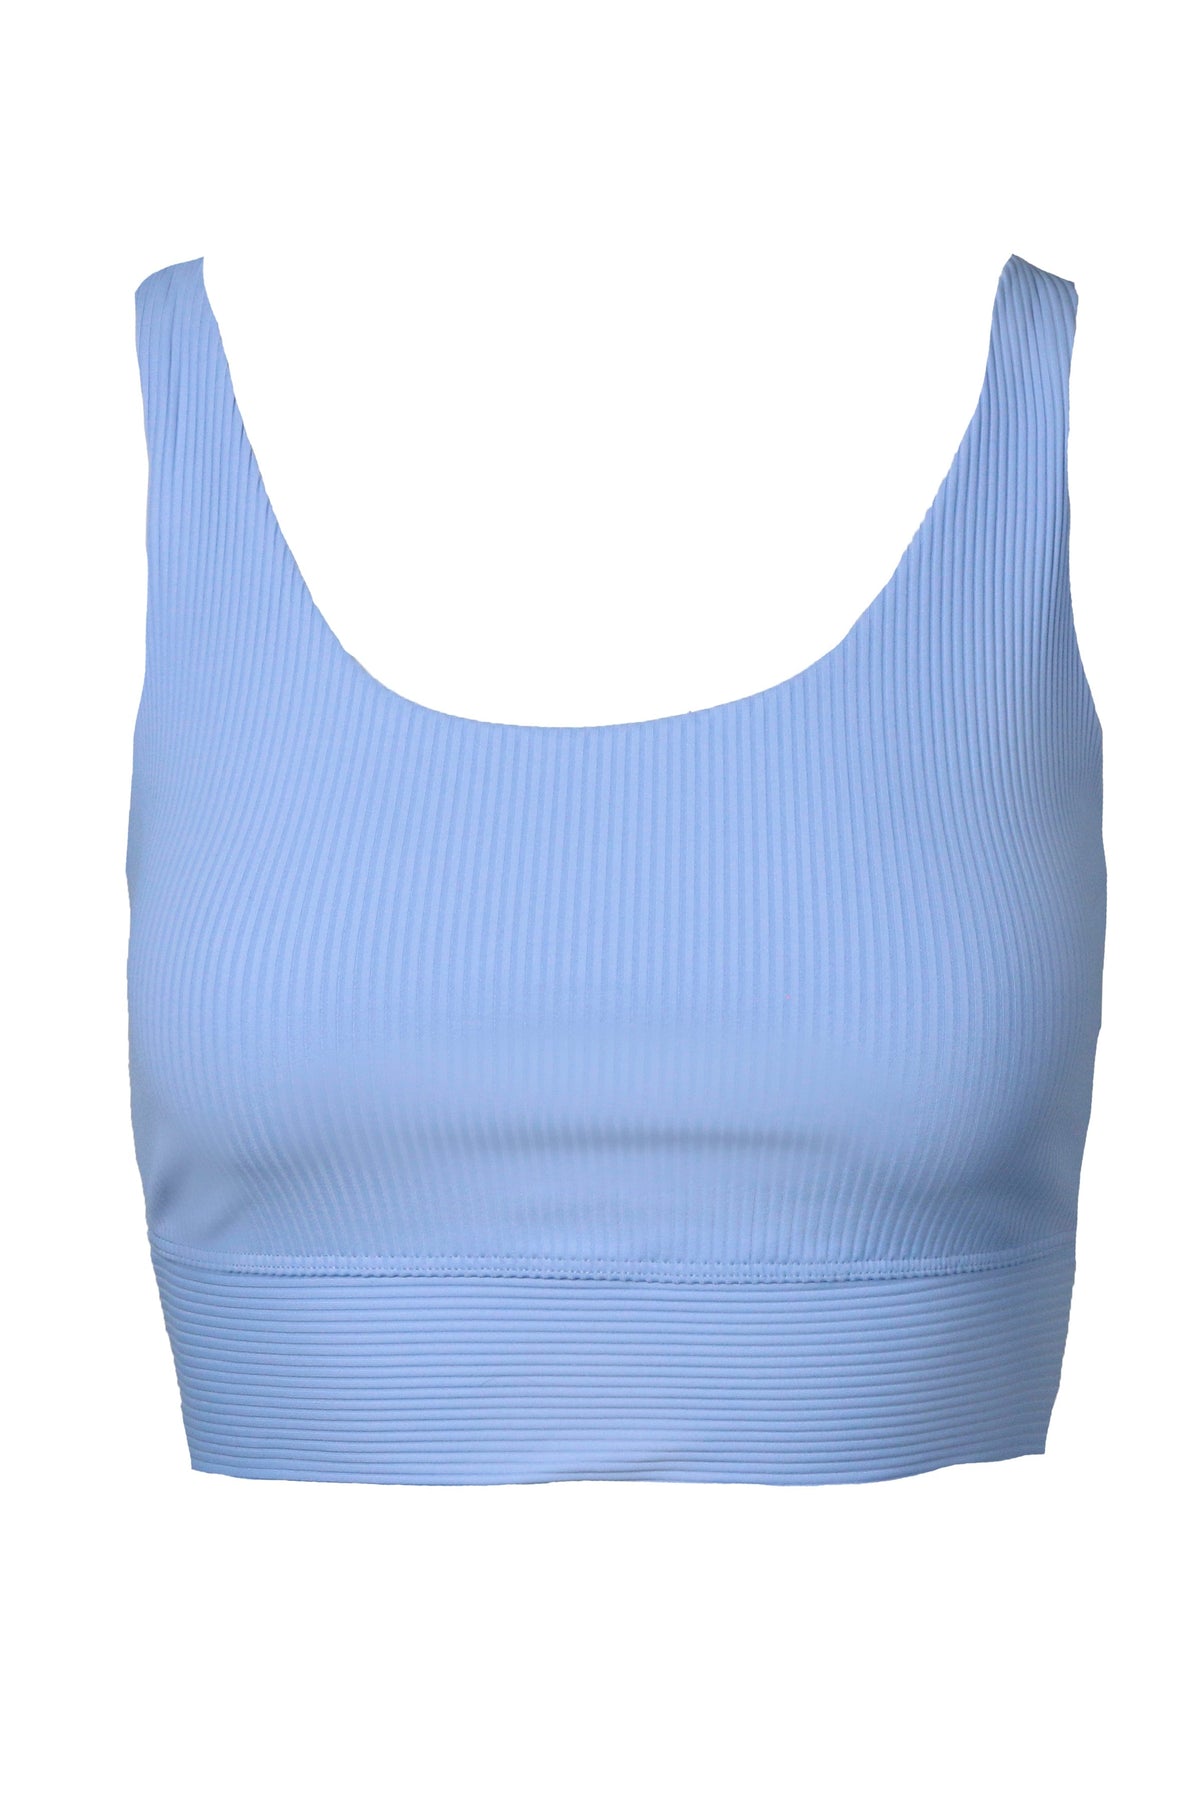 Year of Ours Activewear Baby Blue / S Ribbed Gym Bra - Baby Blue